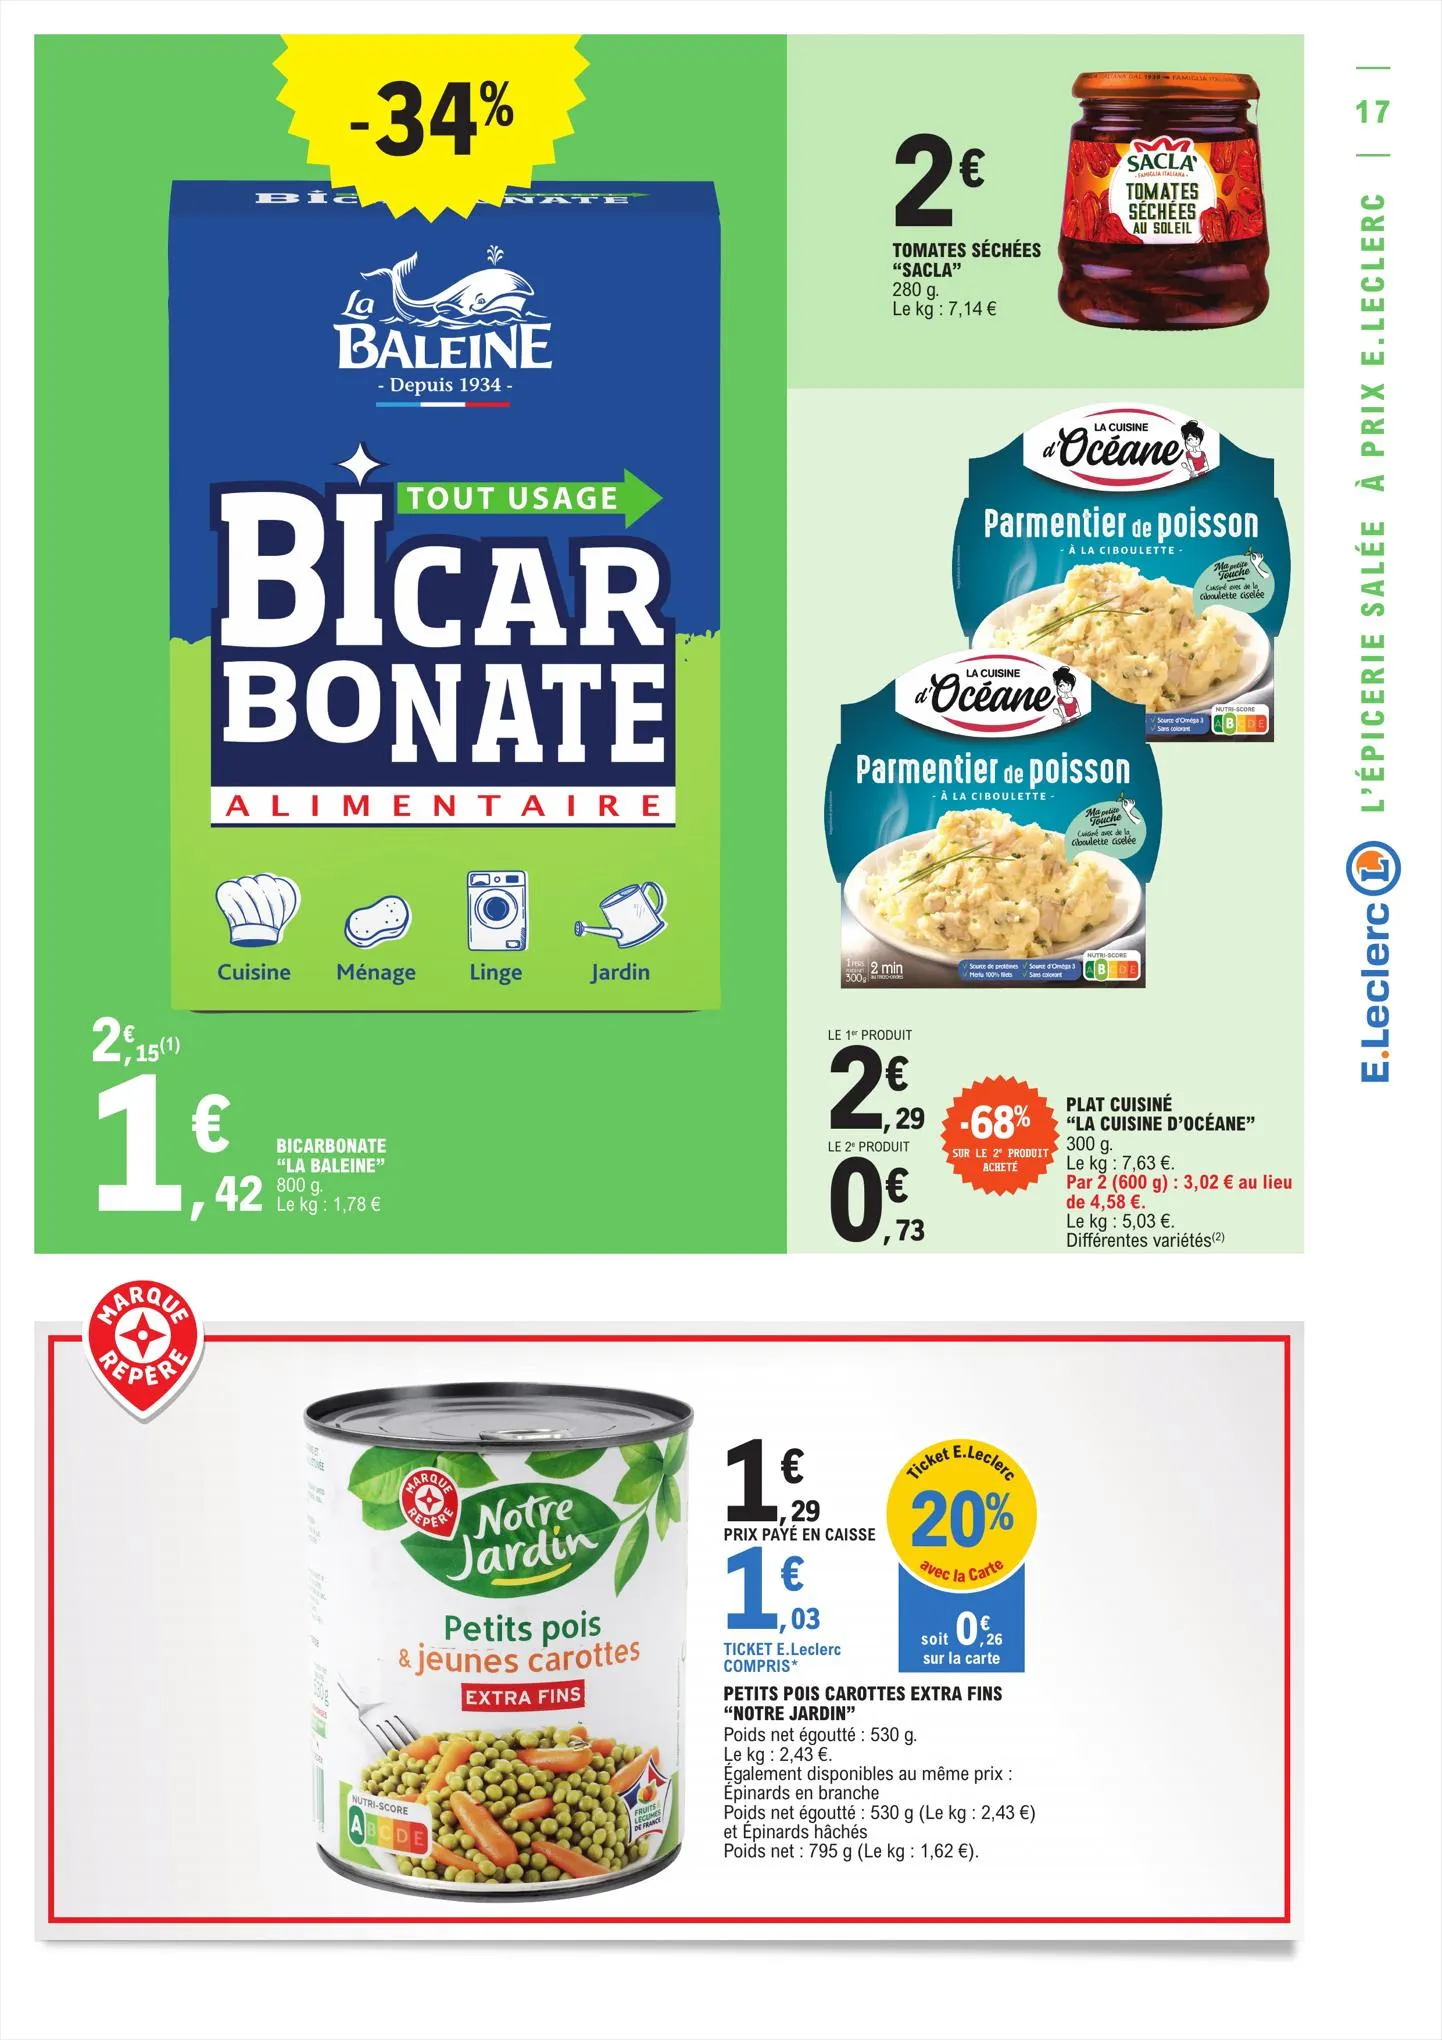 Catalogue Relance Alimentaire 10 - Mixte, page 00017